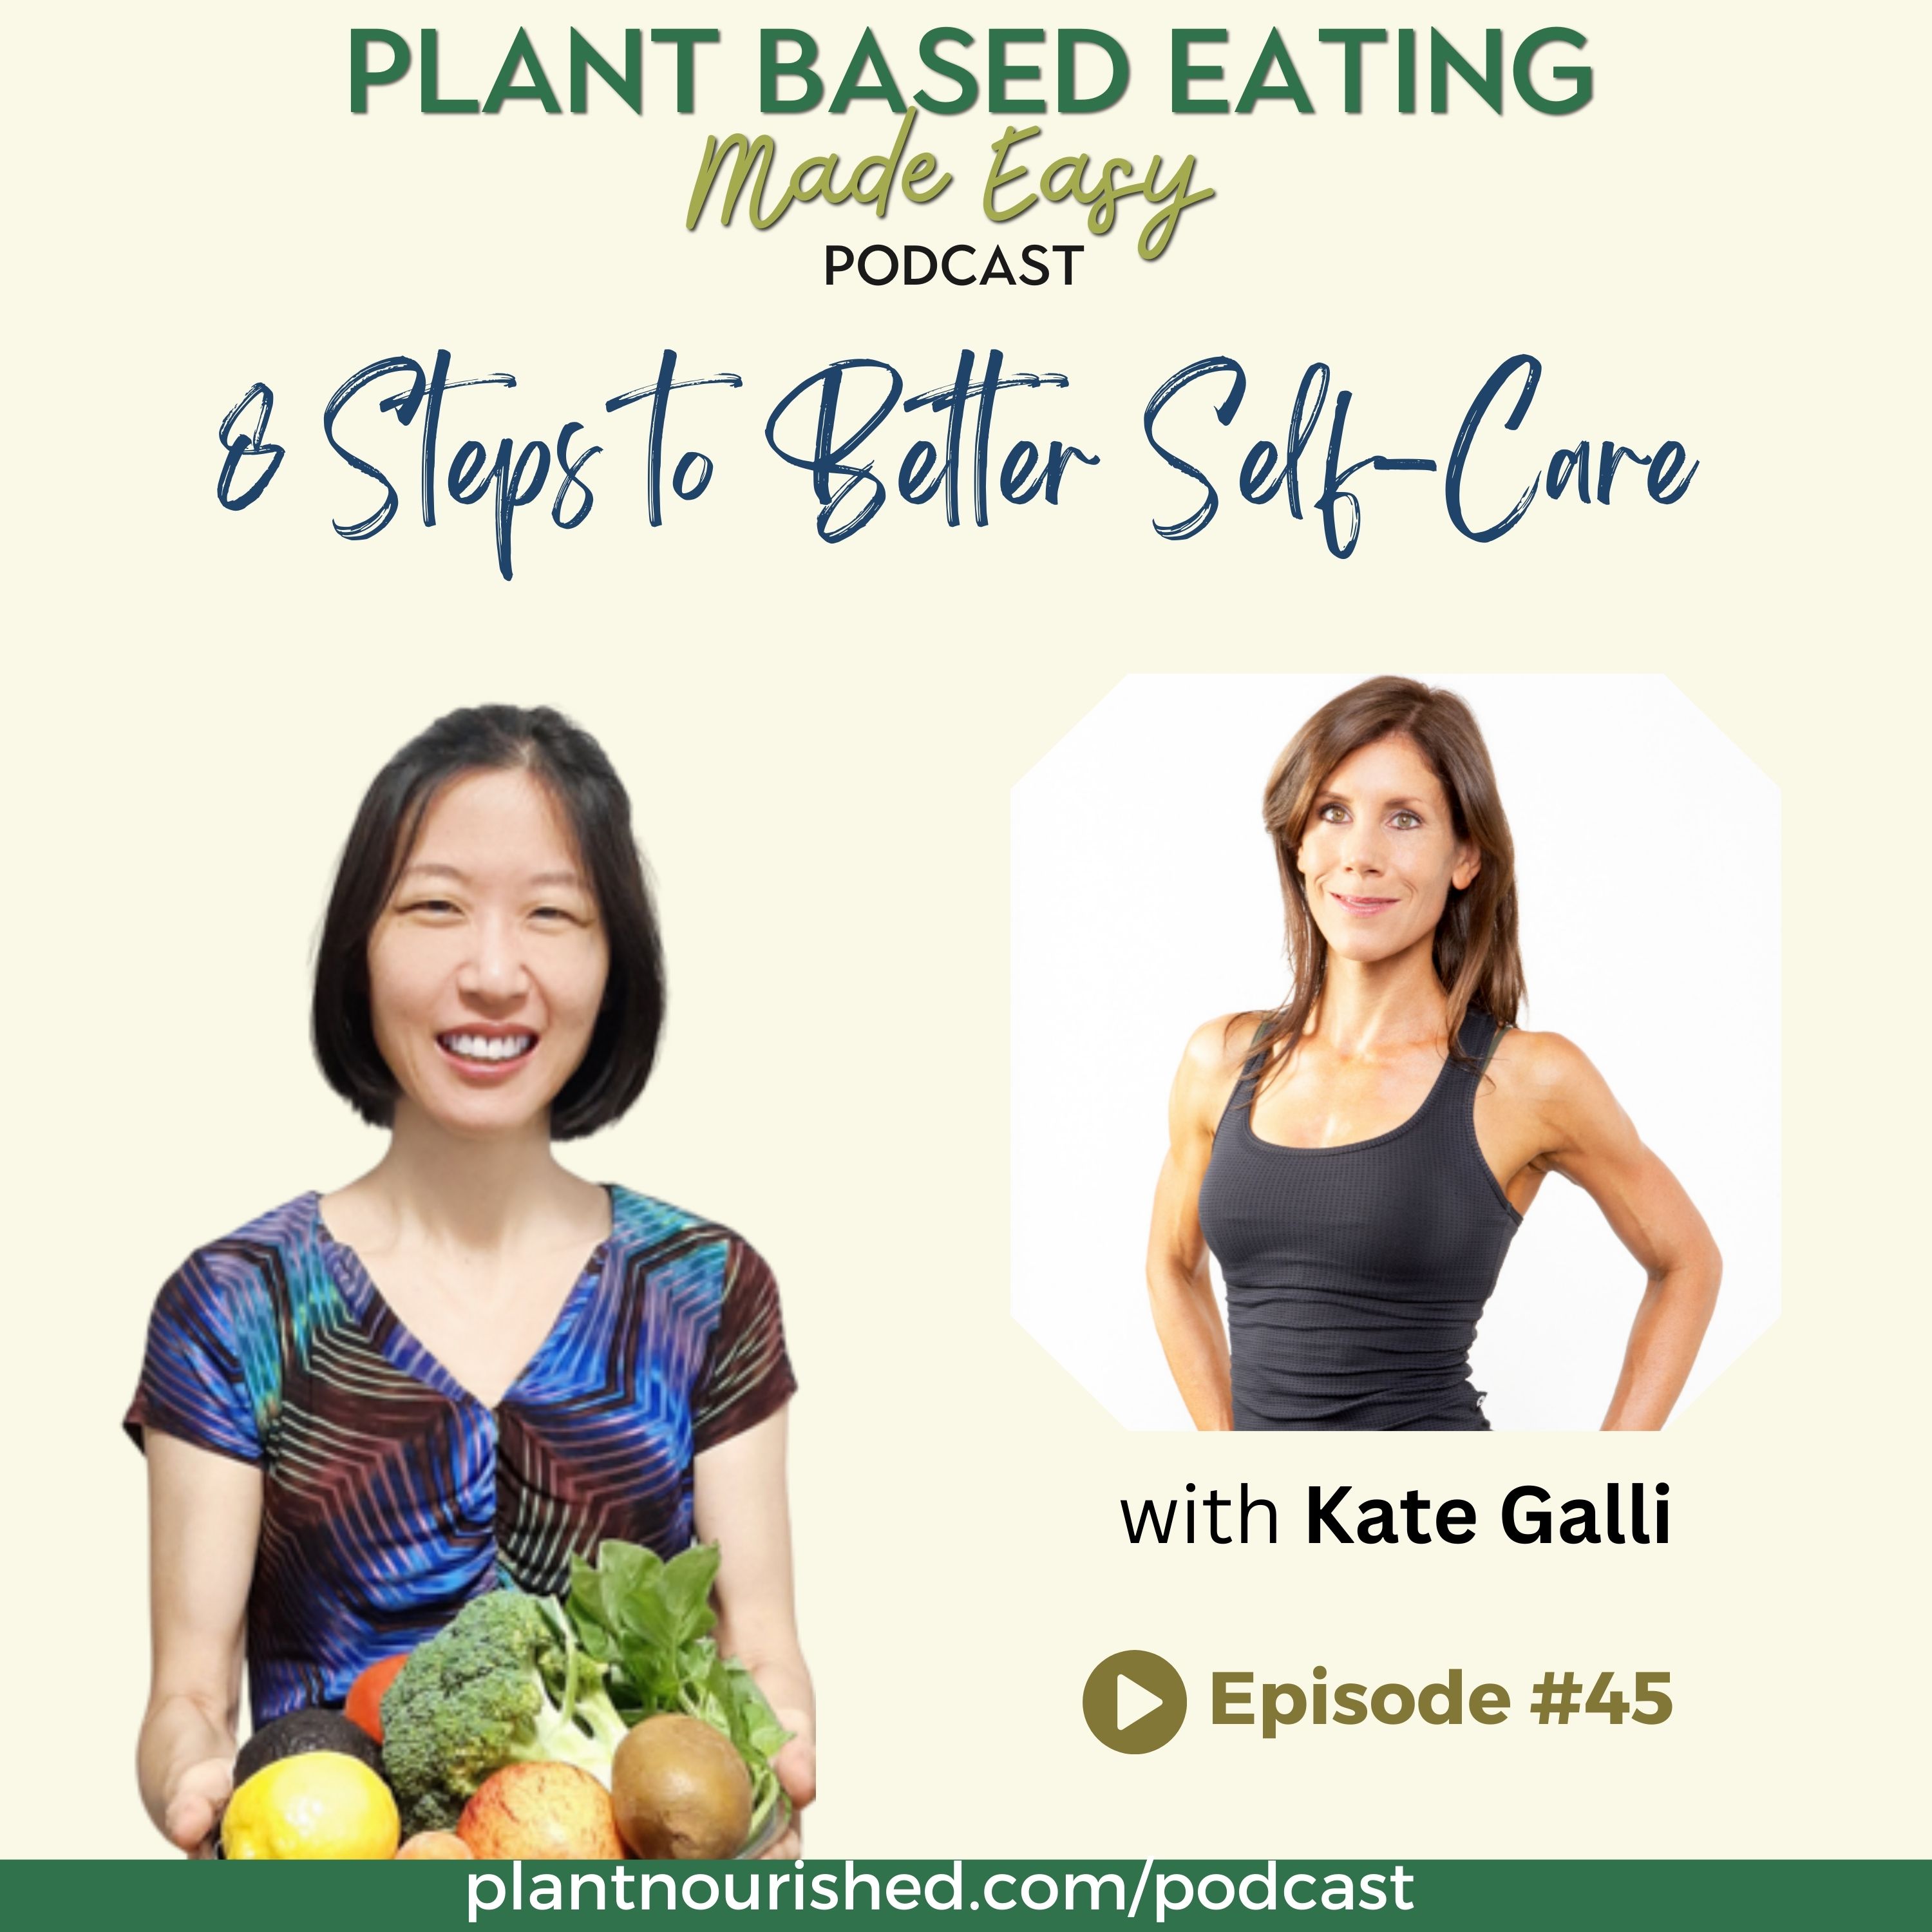 Plant Based Eating Made Easy Podcast: Kate Galli